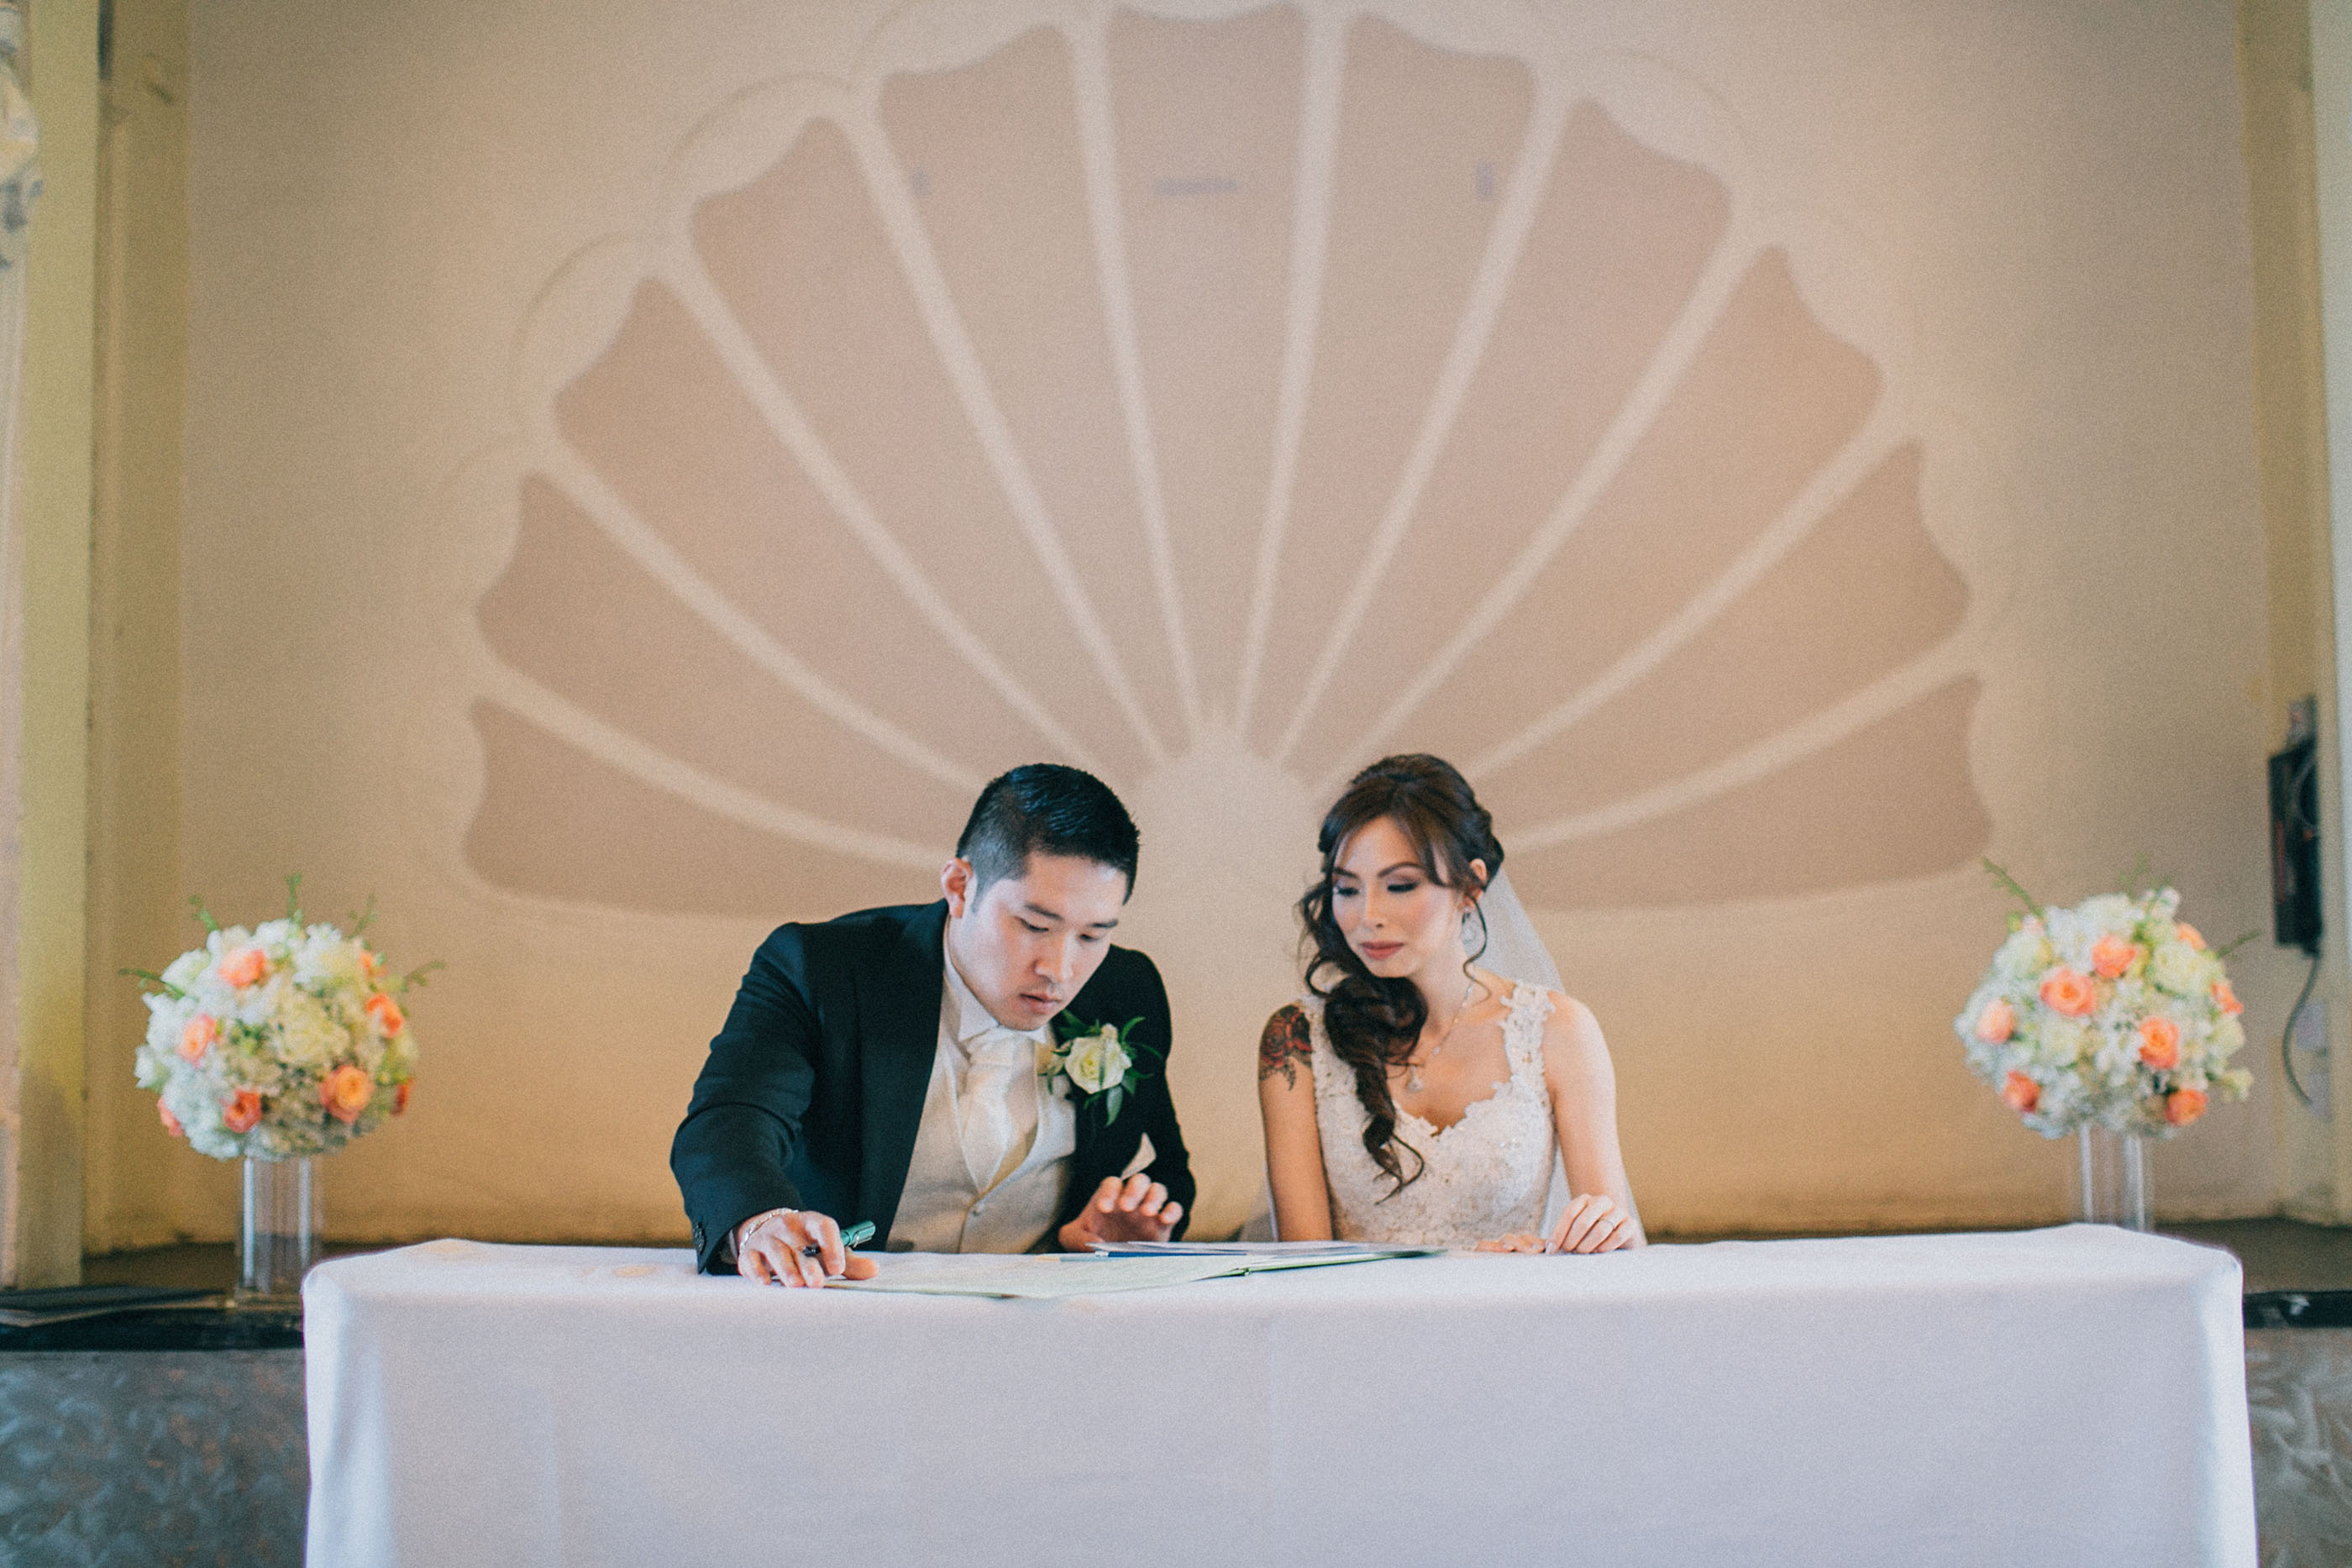 nicholas-lau-photo-photography-fine-art-film-wedding-london-asian-chinese-uk-mulitcultural-ceremony-reception-signing-registry-the-star-and-garter-venue